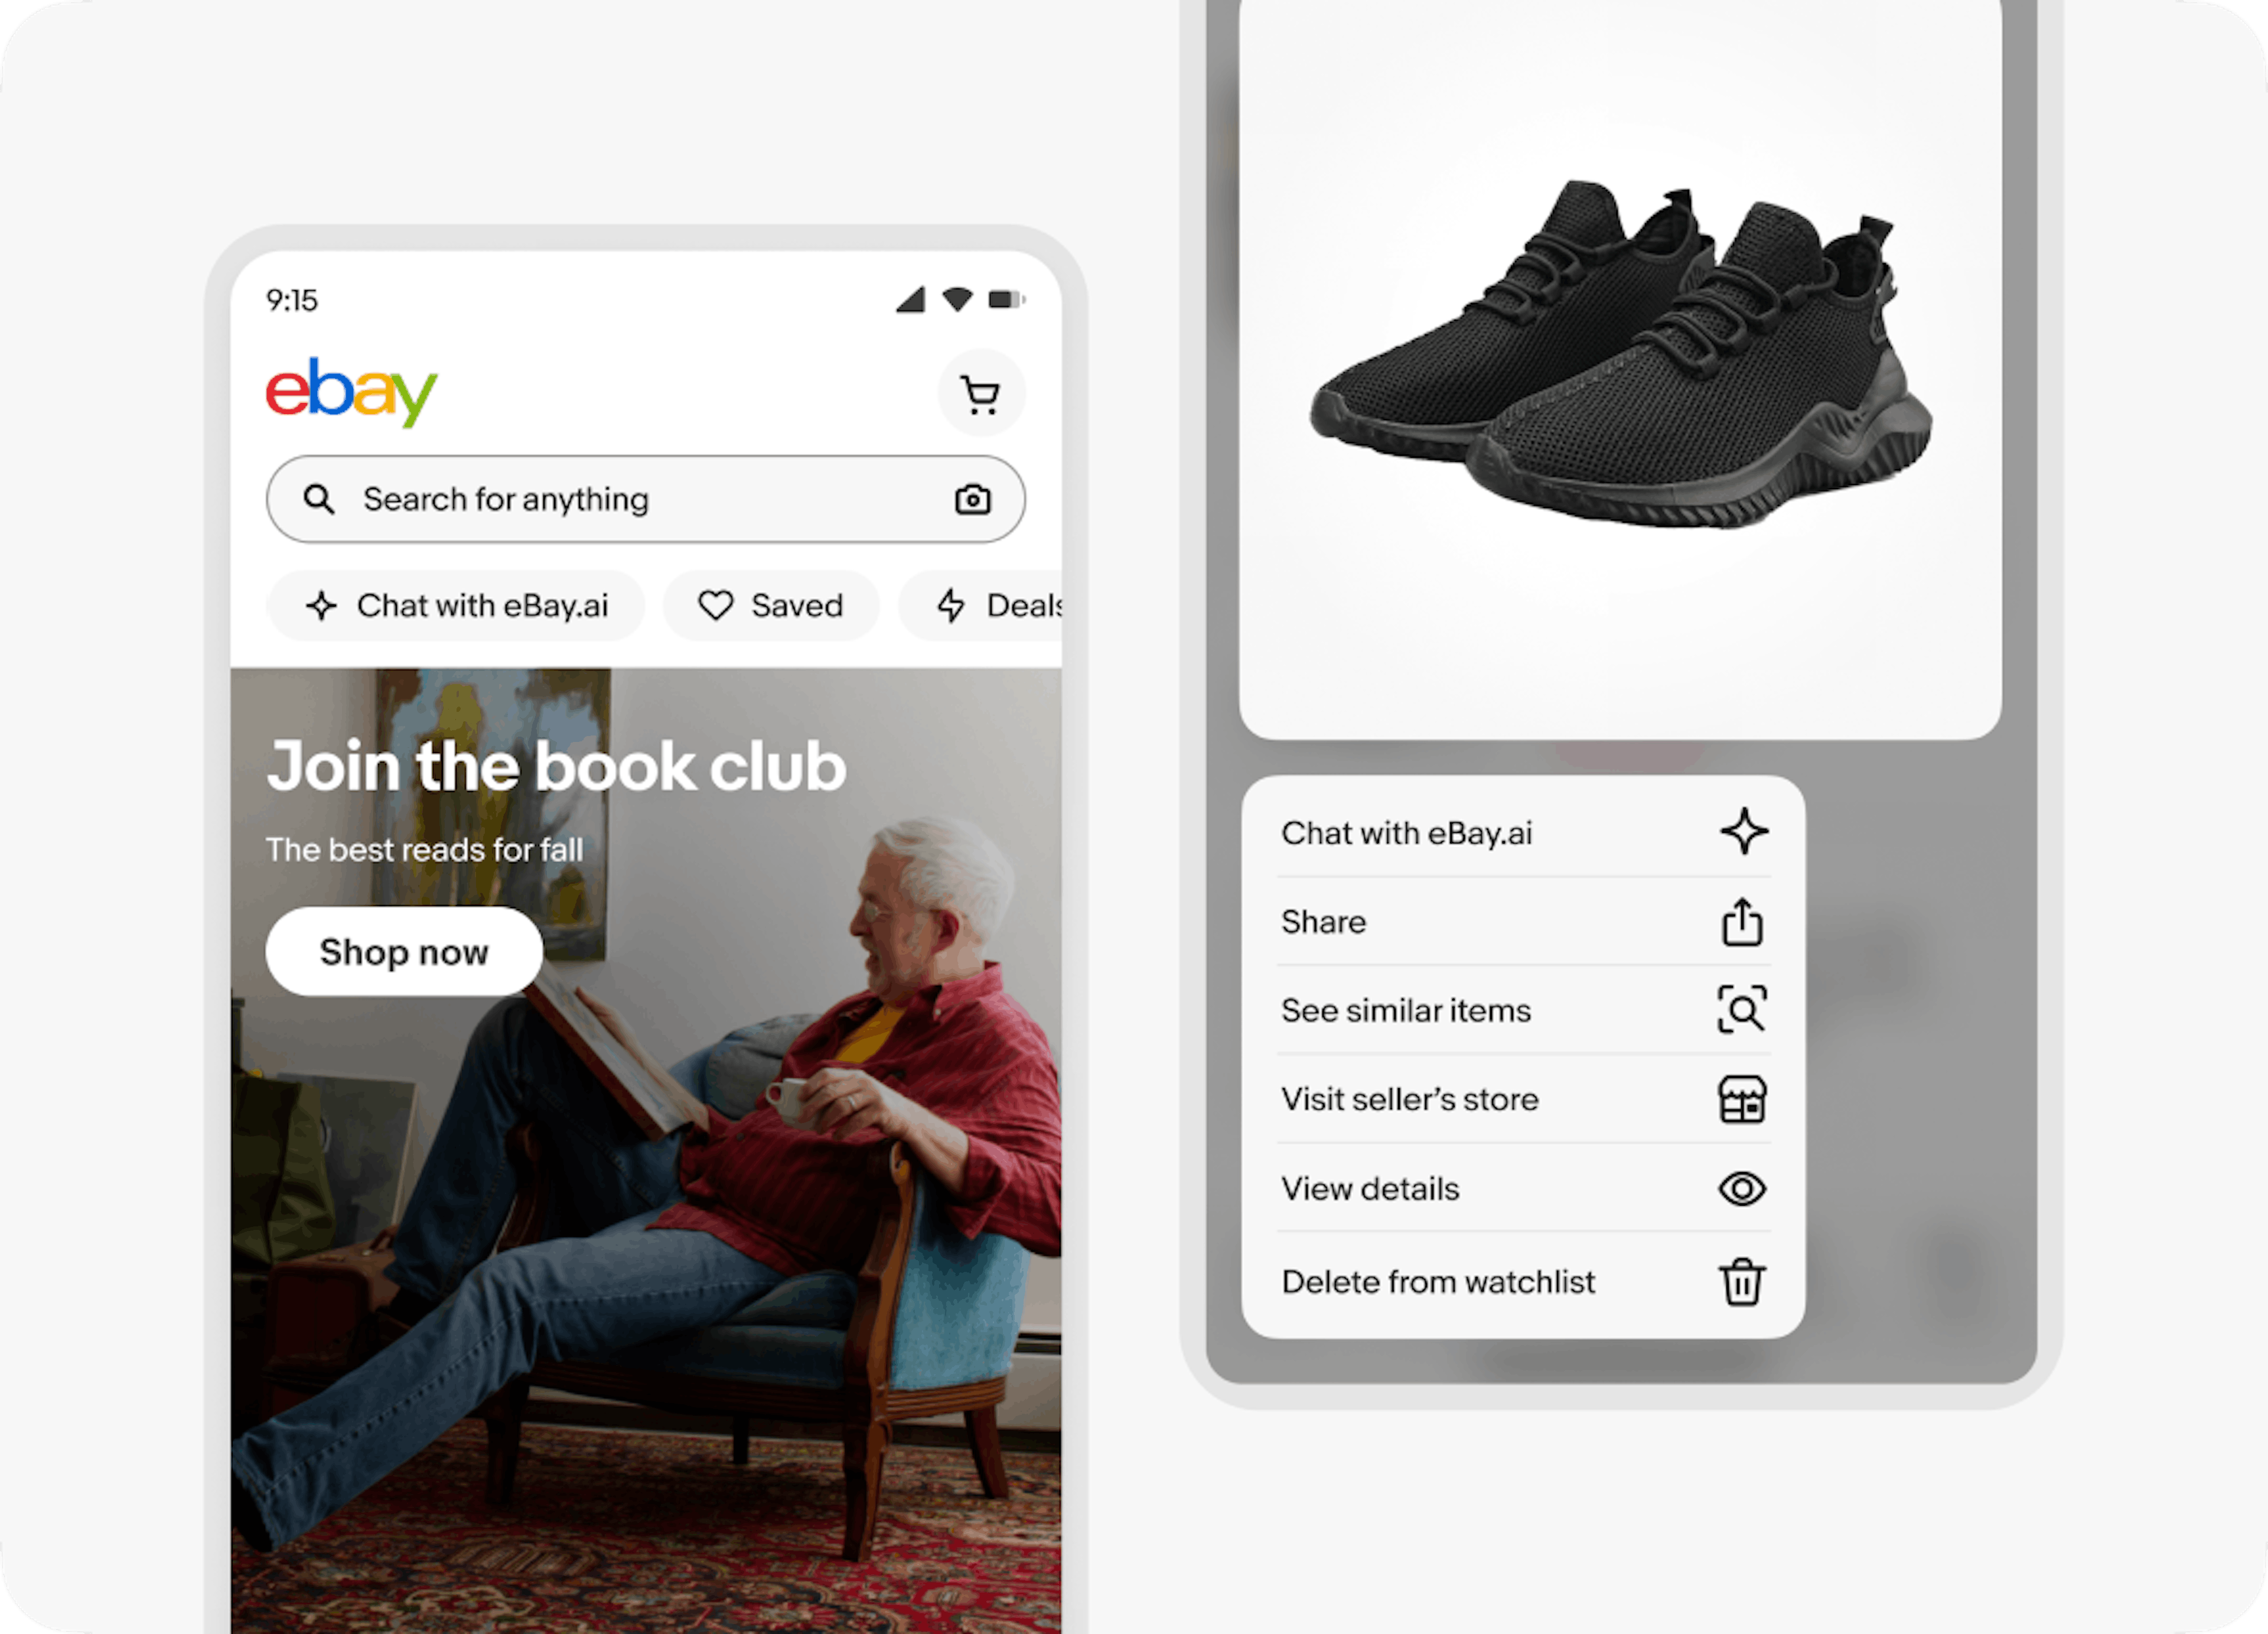 Two examples of ways to navigate to the eBay.ai chat experience. The first is from a navigation pill right under search field on the homepage. Navigation pill has the stroked AI icon and text string, “Chat with eBay.ai”. The second is via a popover menu that appears when user long presses on an image. In this example, the image if of black sneakers with the same icon and text string. This icon and text string is the first in a list of 5 other actions user can take on the item.